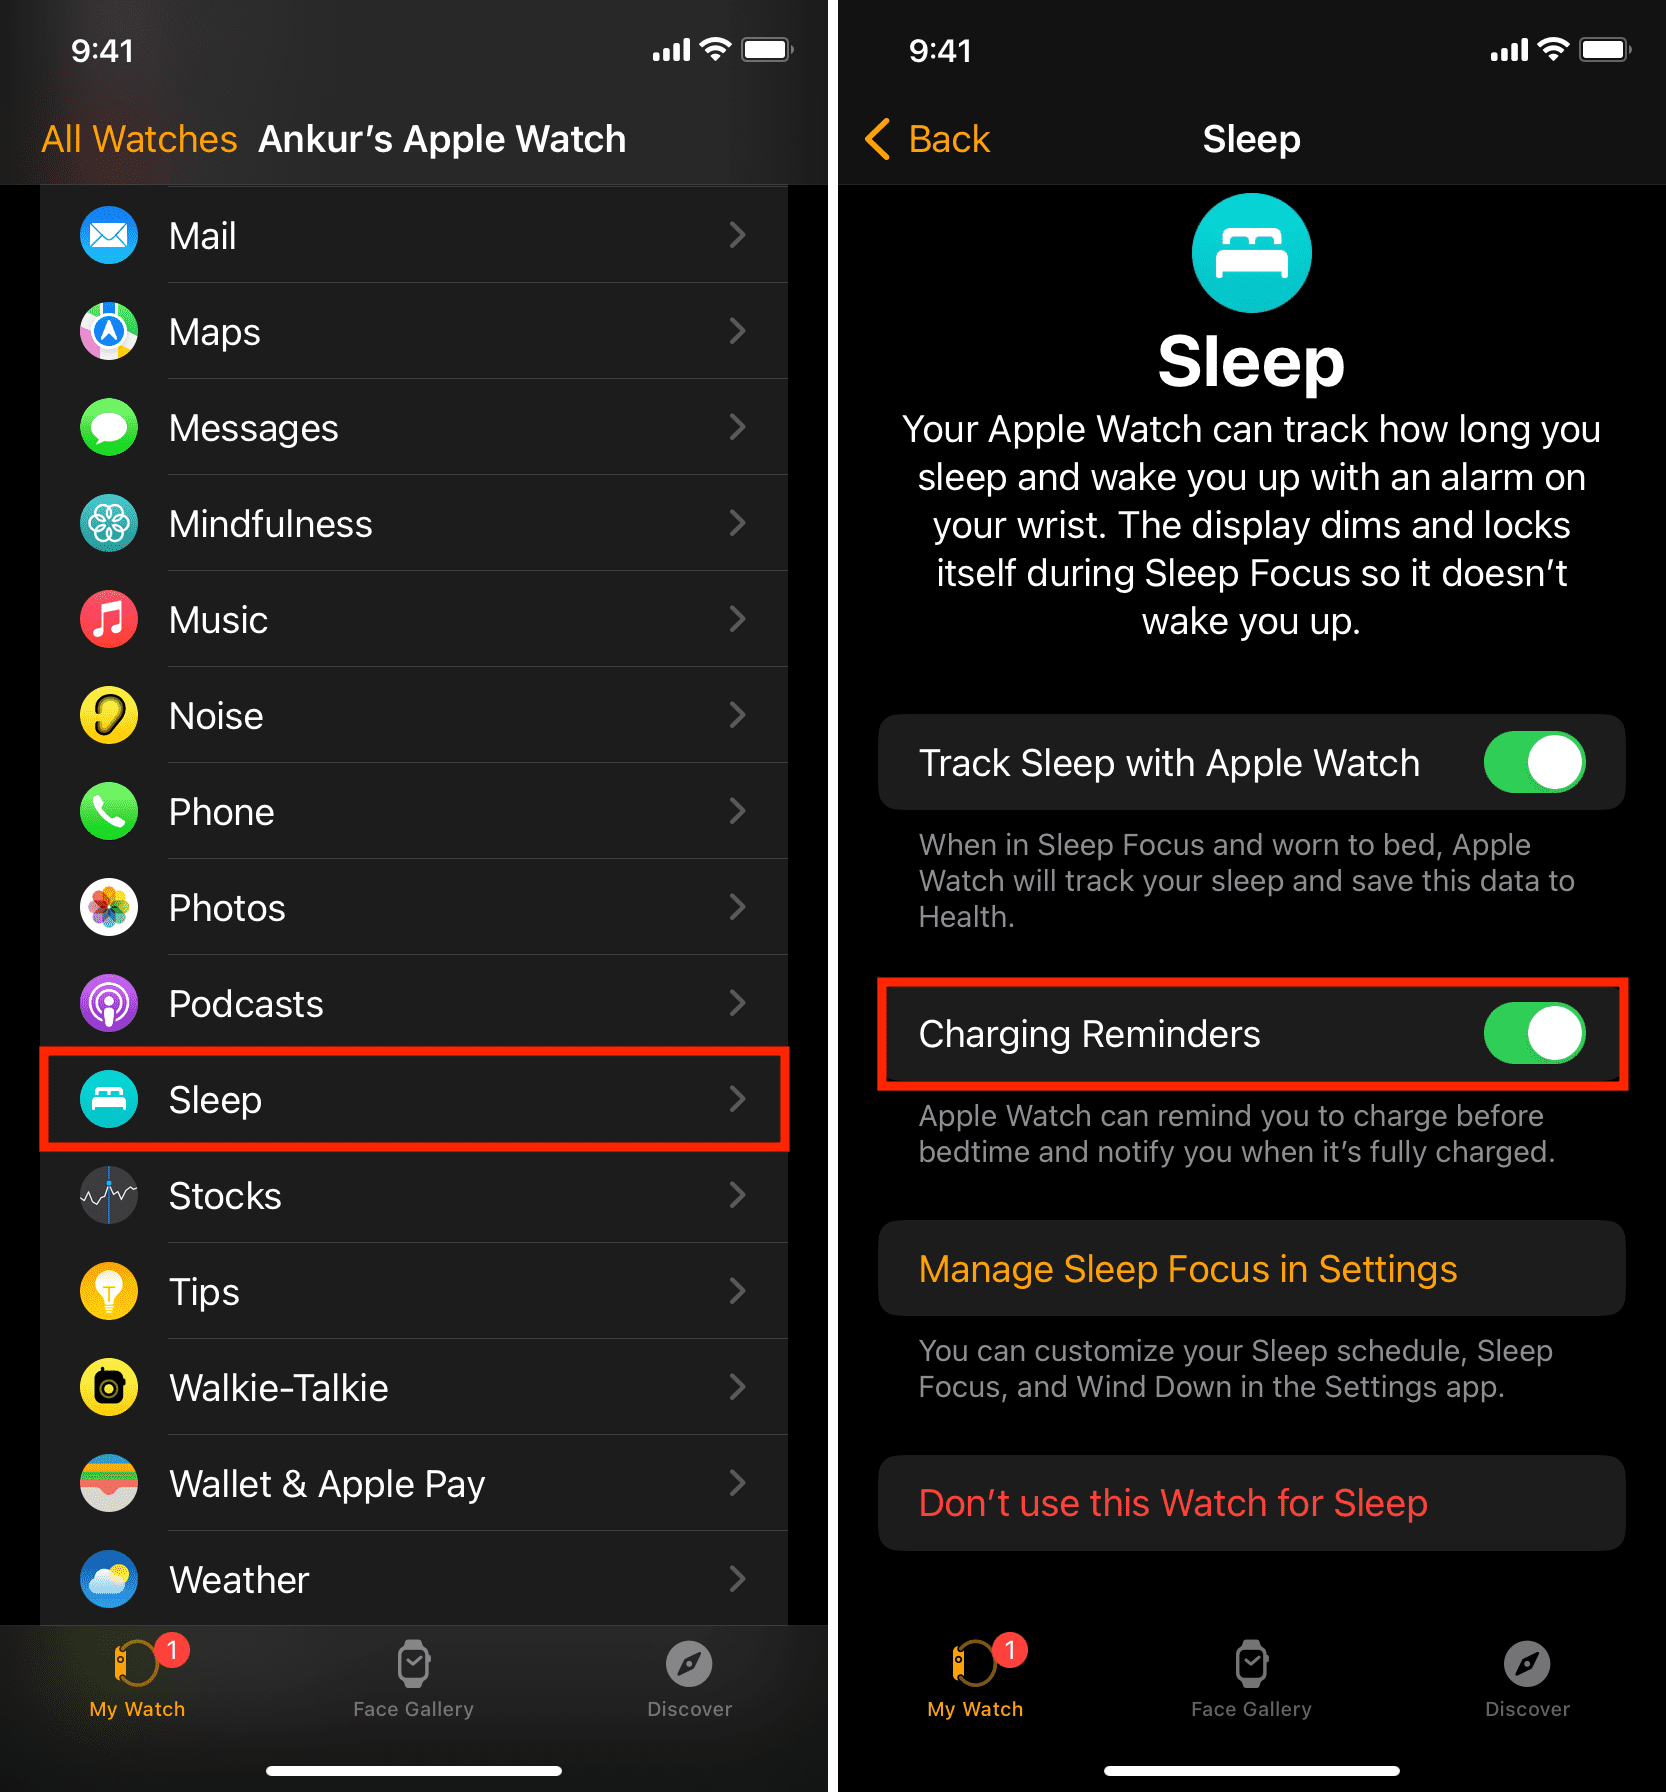 Enable Charging Reminders for Apple Watch